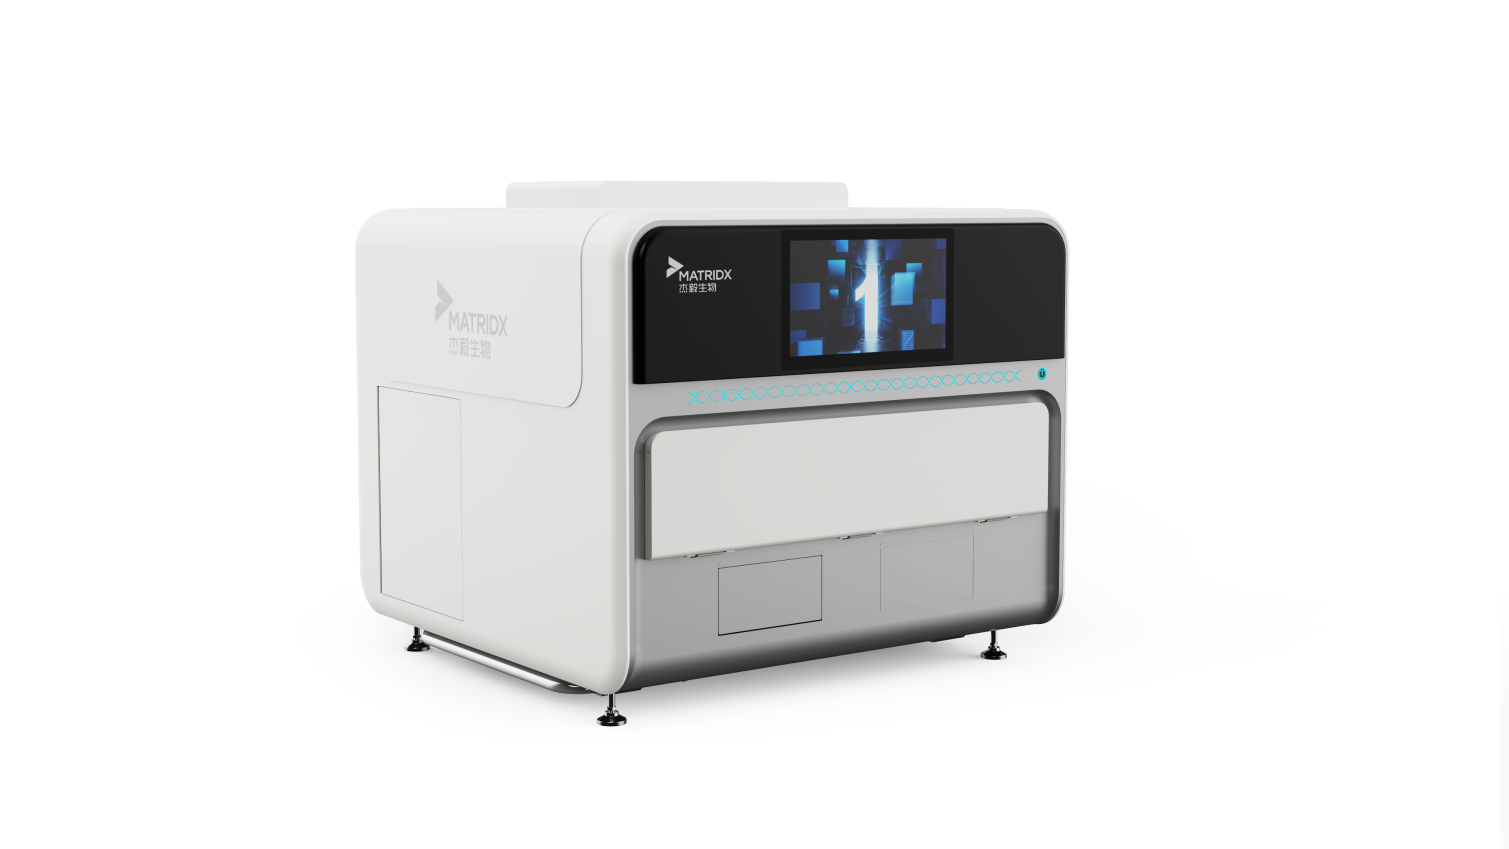 Fully Automated Nucleic Acid Detection and Amplification System